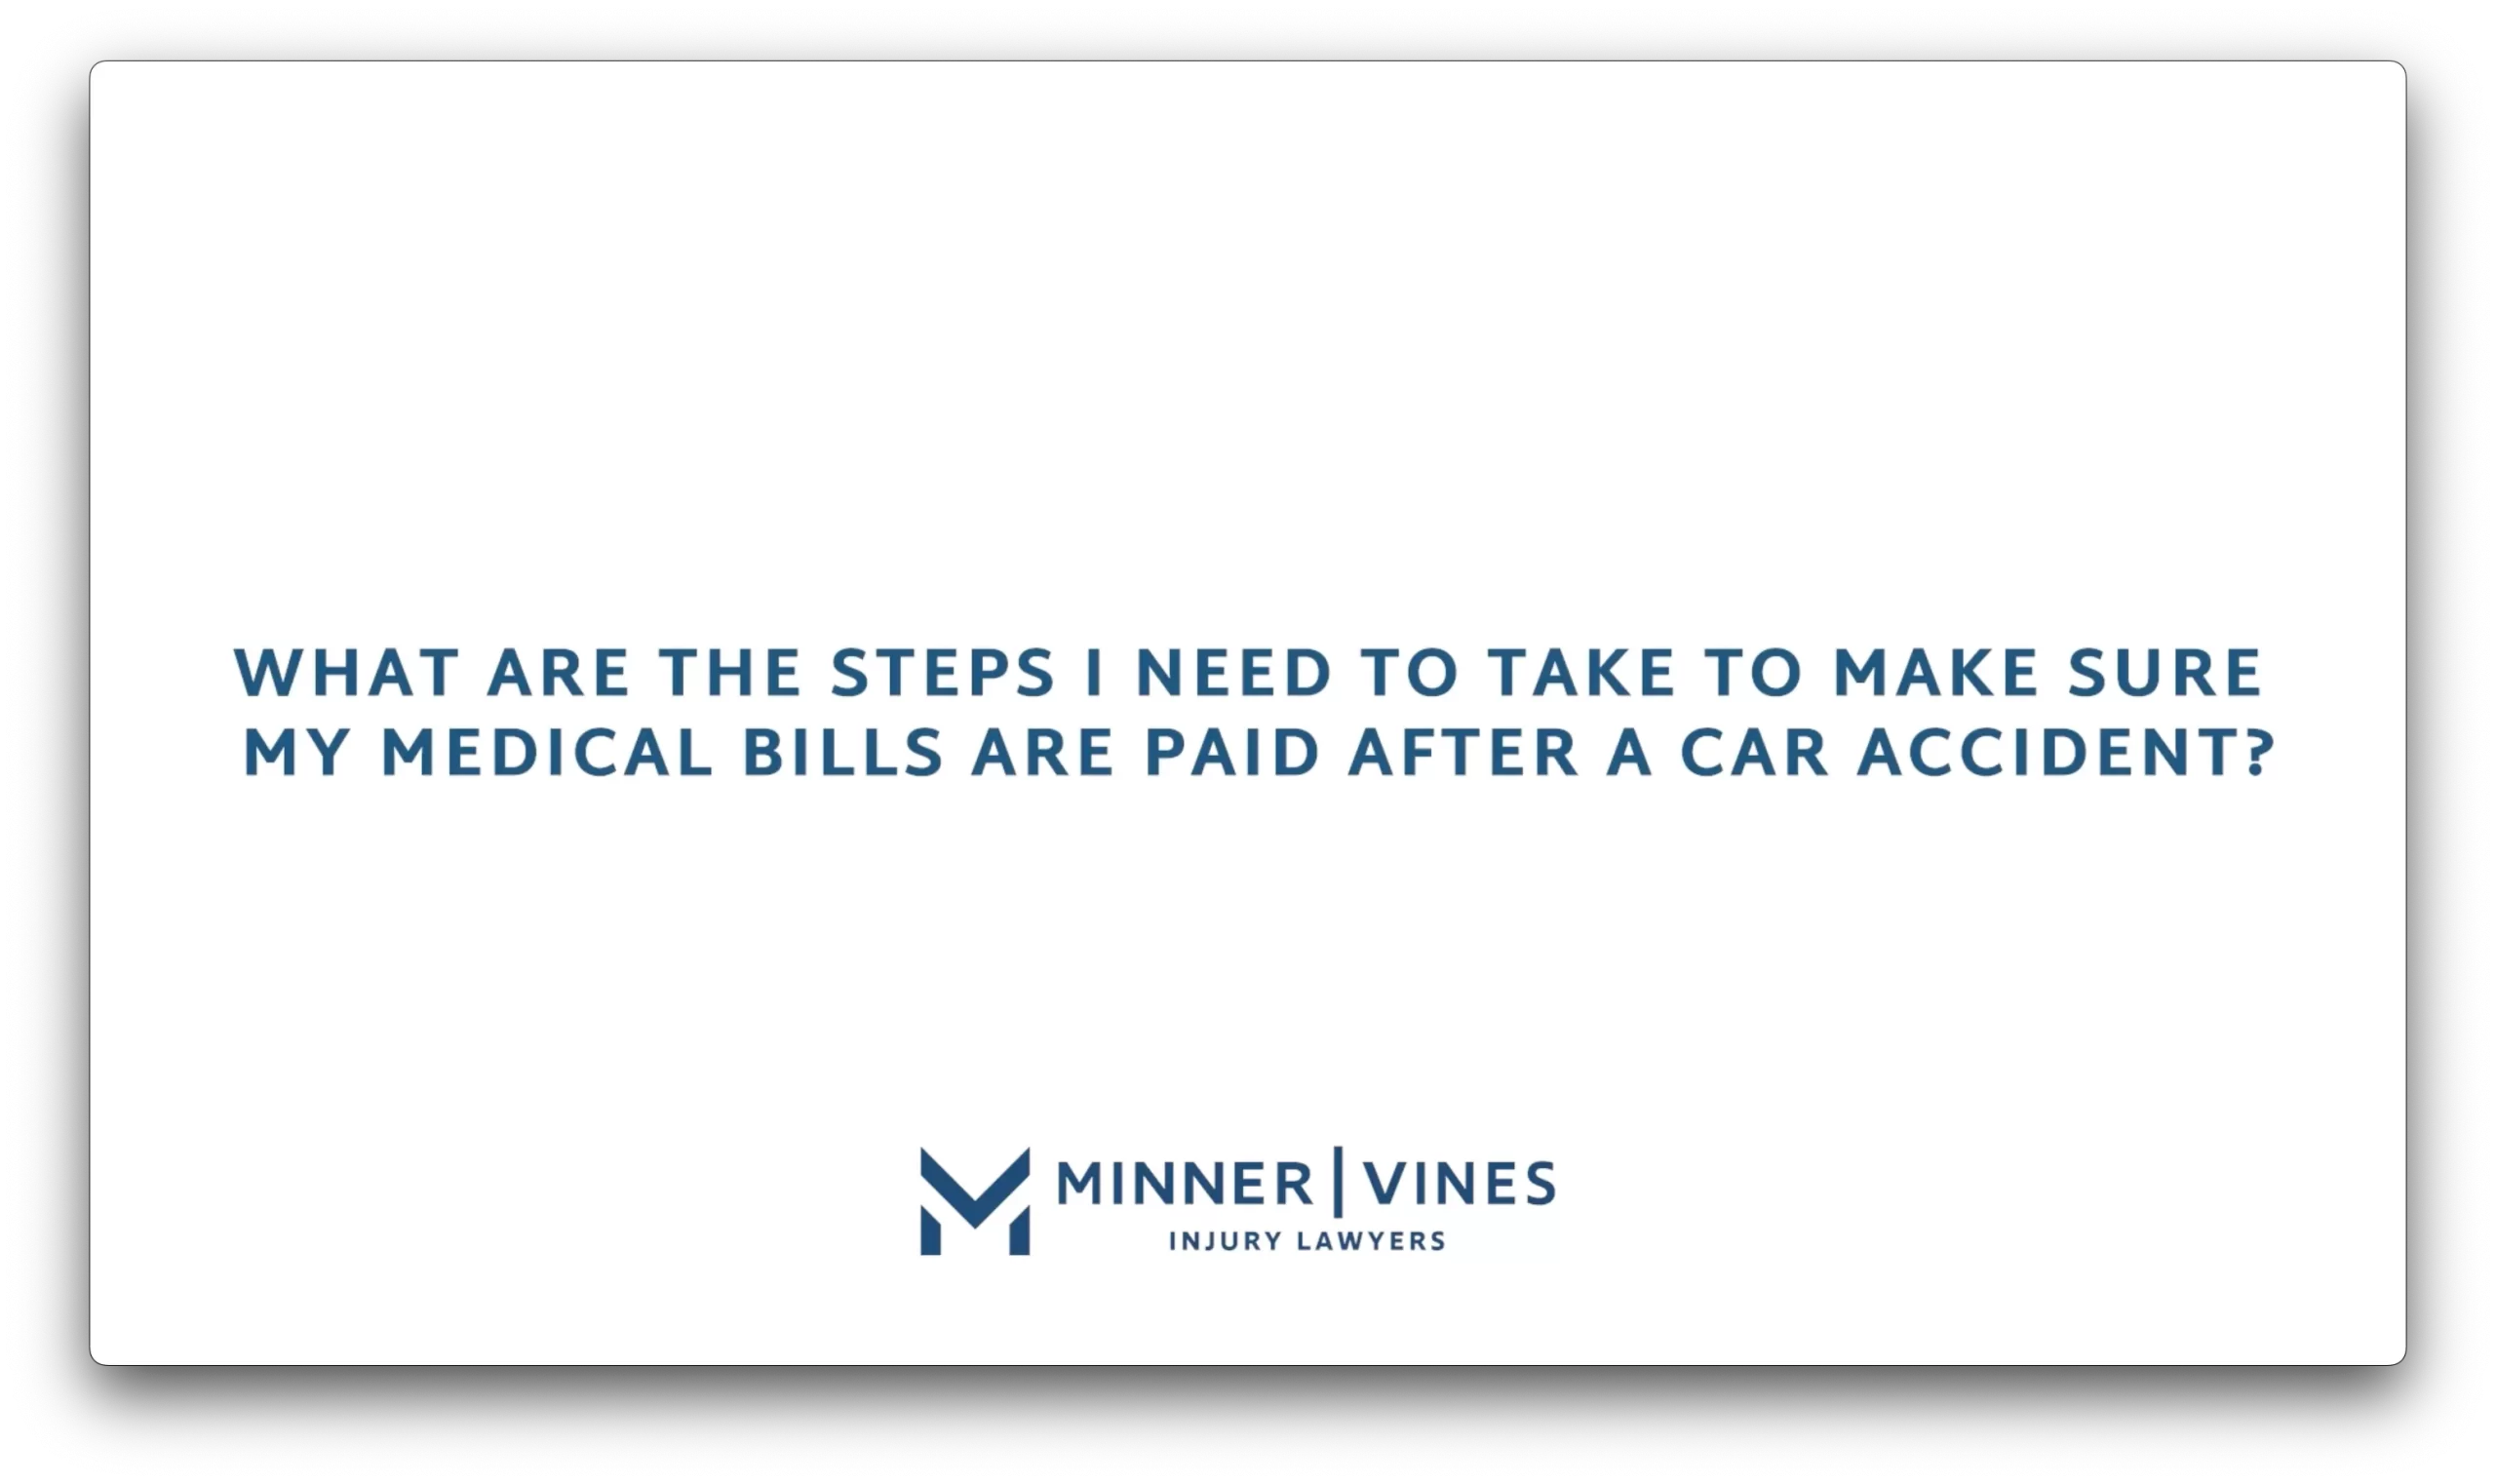 What are the steps I need to take to make sure my medical bills are paid after a car accident?